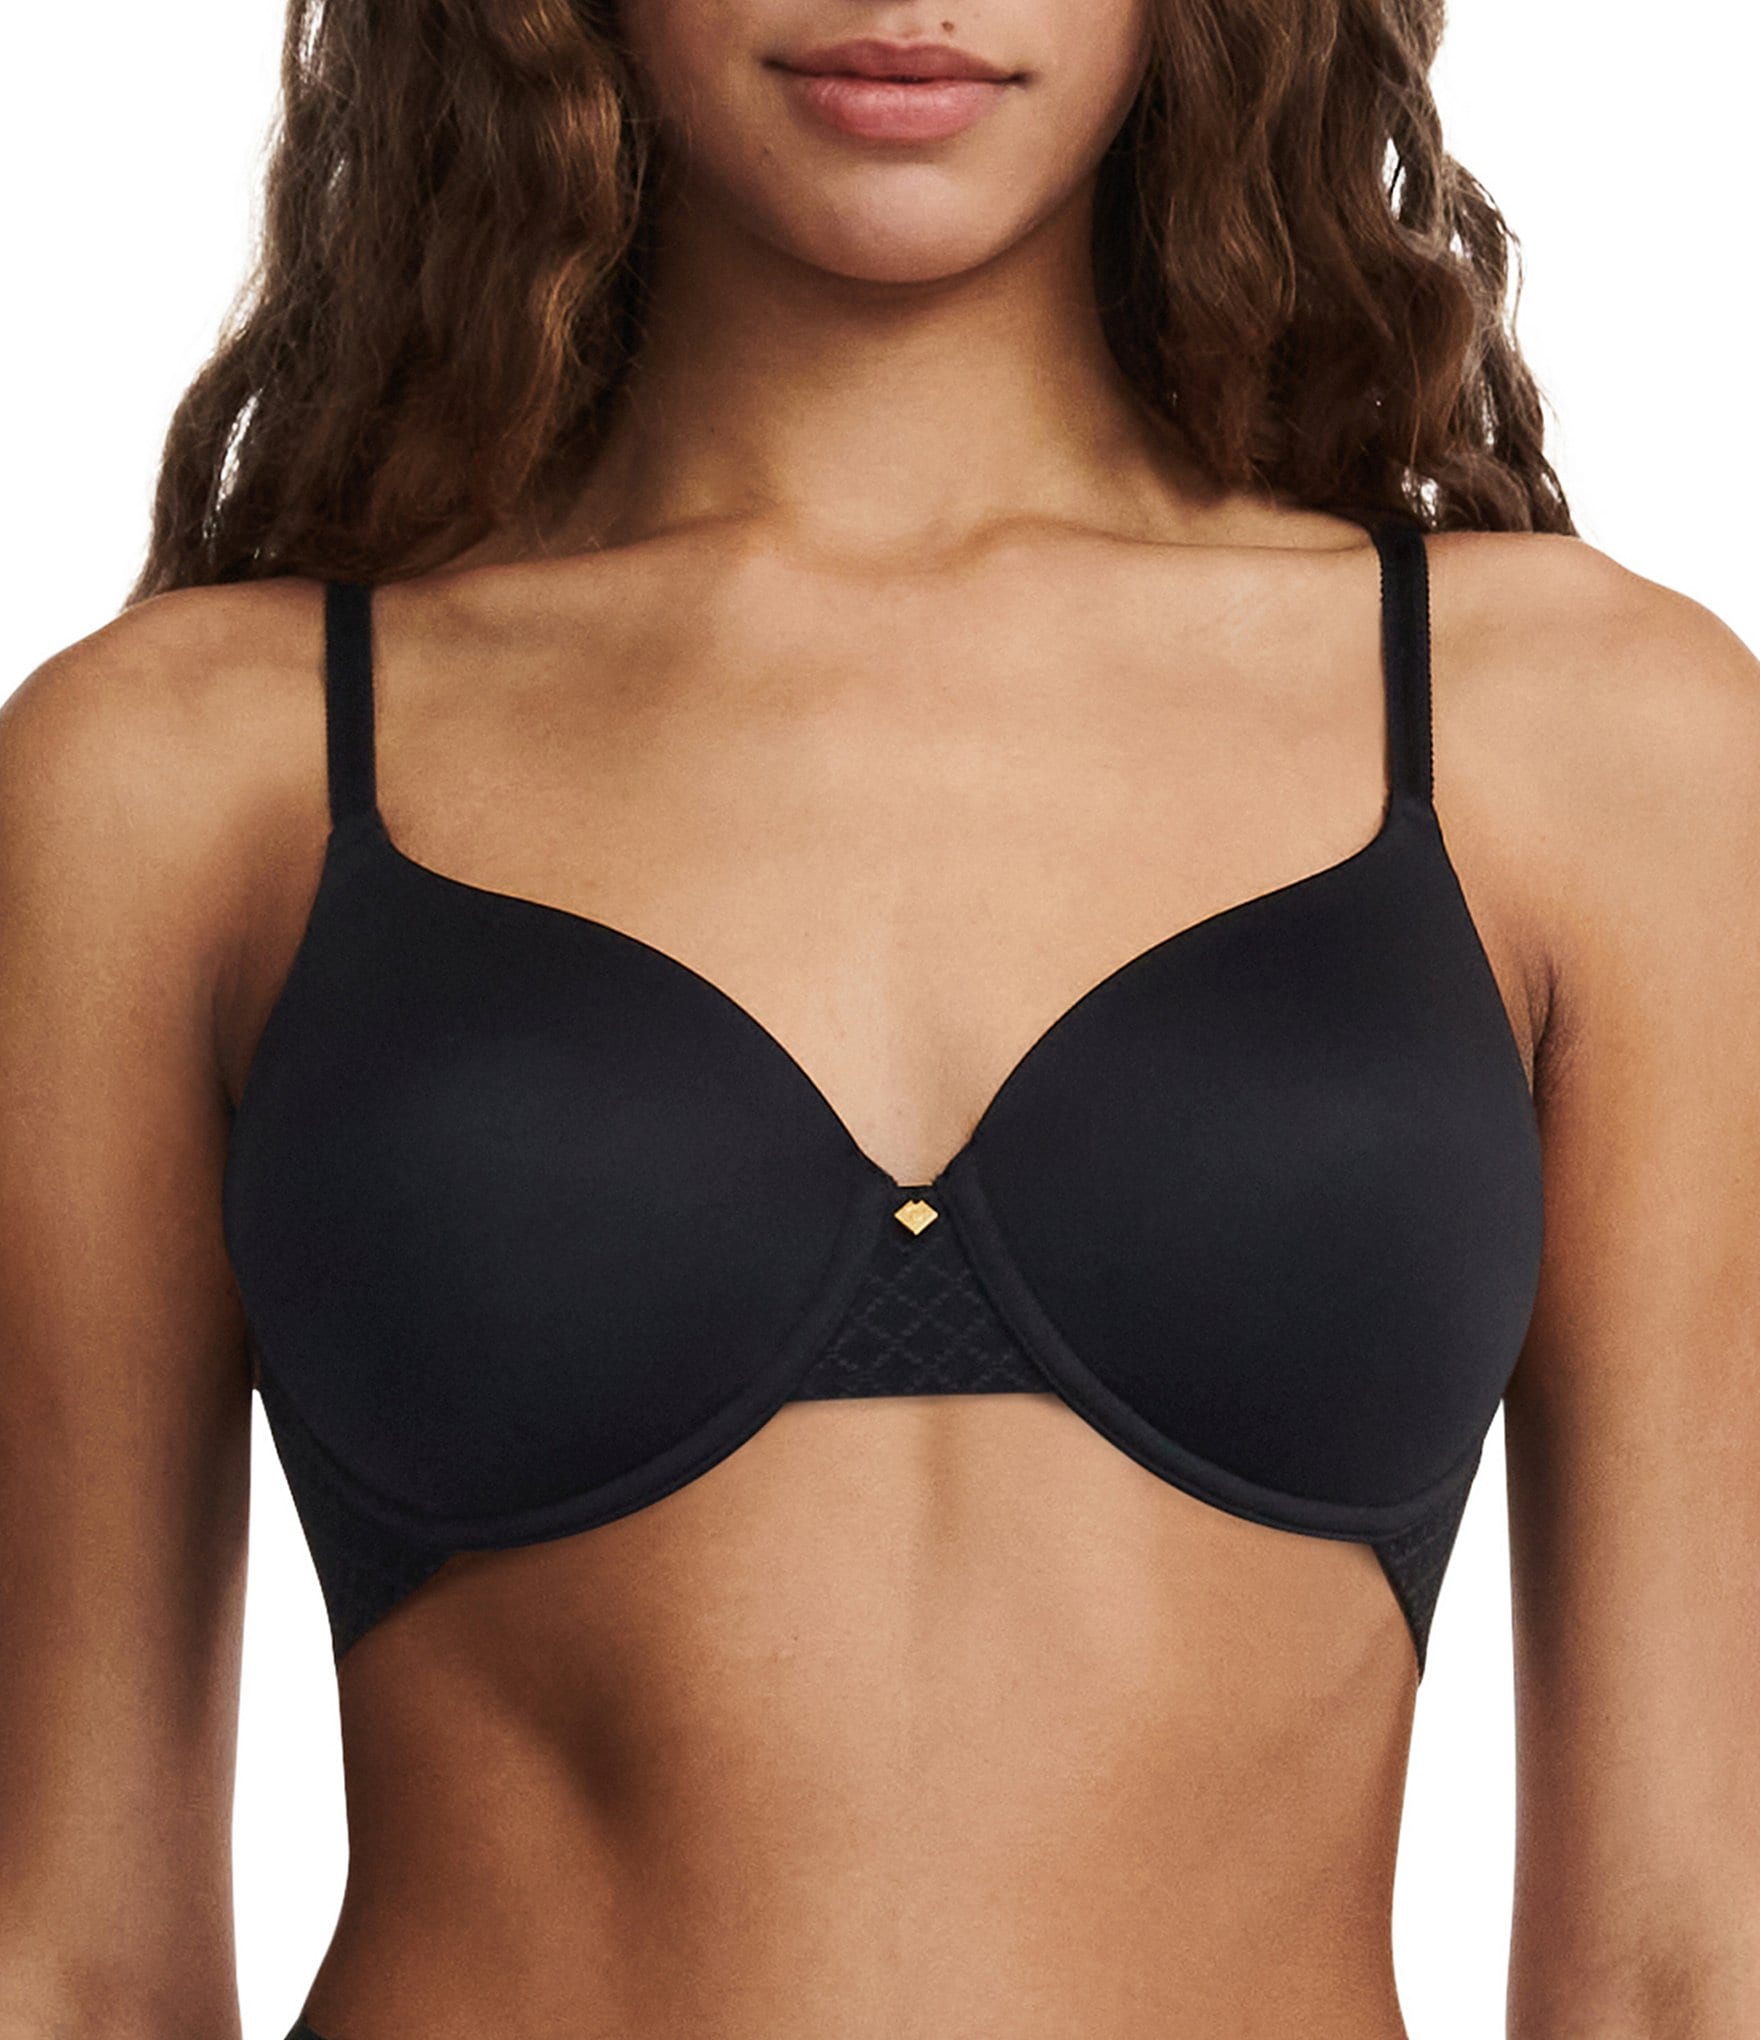 Buy  Brand - Nora Nico, Women's 6.6 Collection-Activewear Natural  Beauty Seamless/Non Wired/T- Shirt Bra,Size:36B - Dark Assorted (Pack of 3)  at